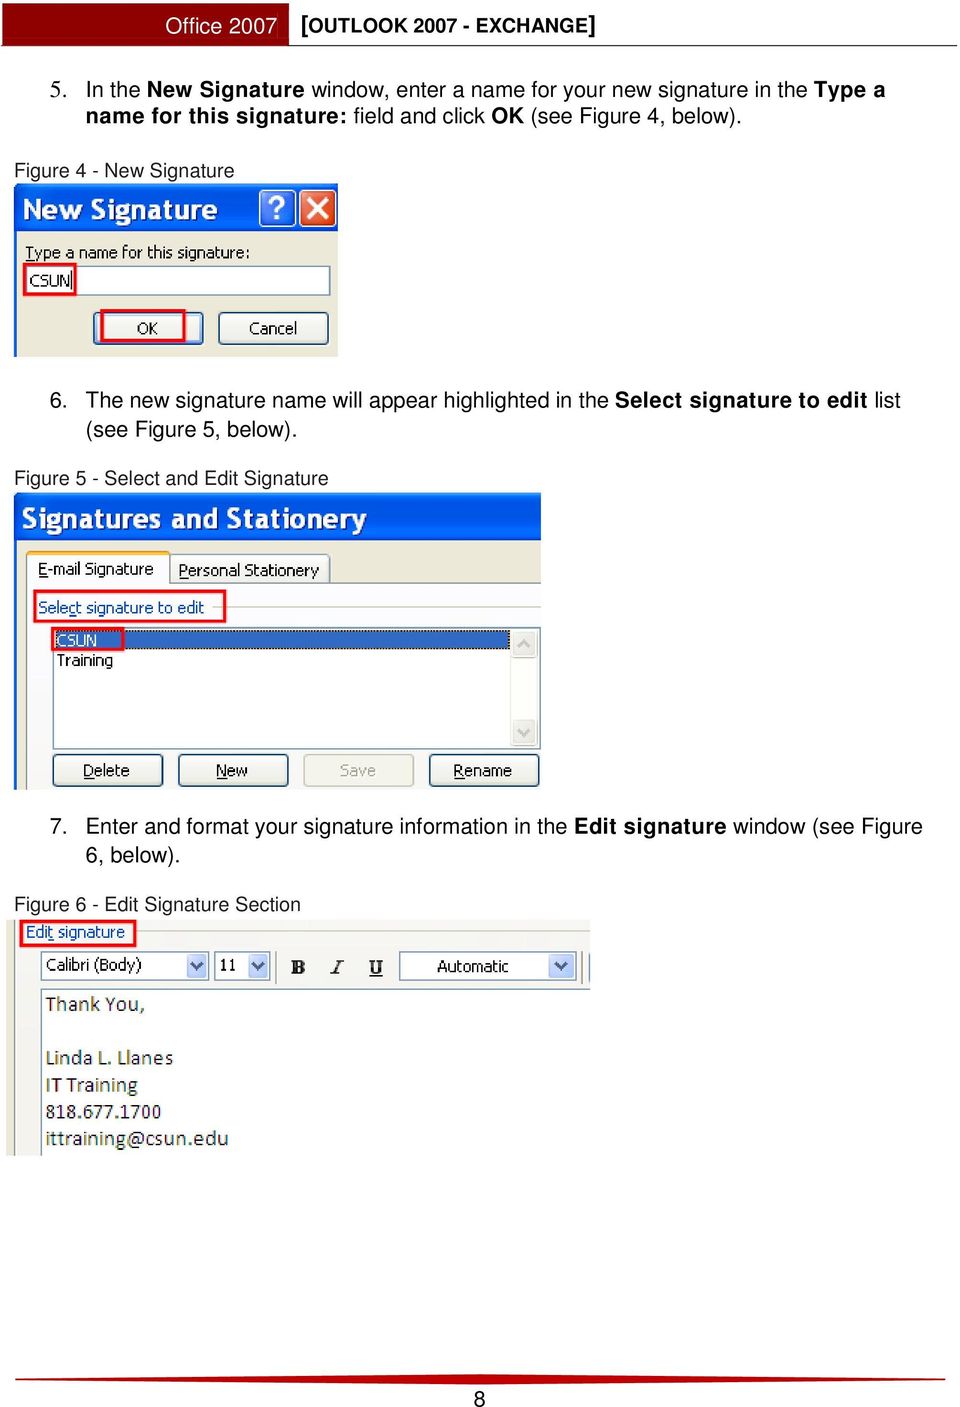 The new signature name will appear highlighted in the Select signature to edit list (see Figure 5, below).